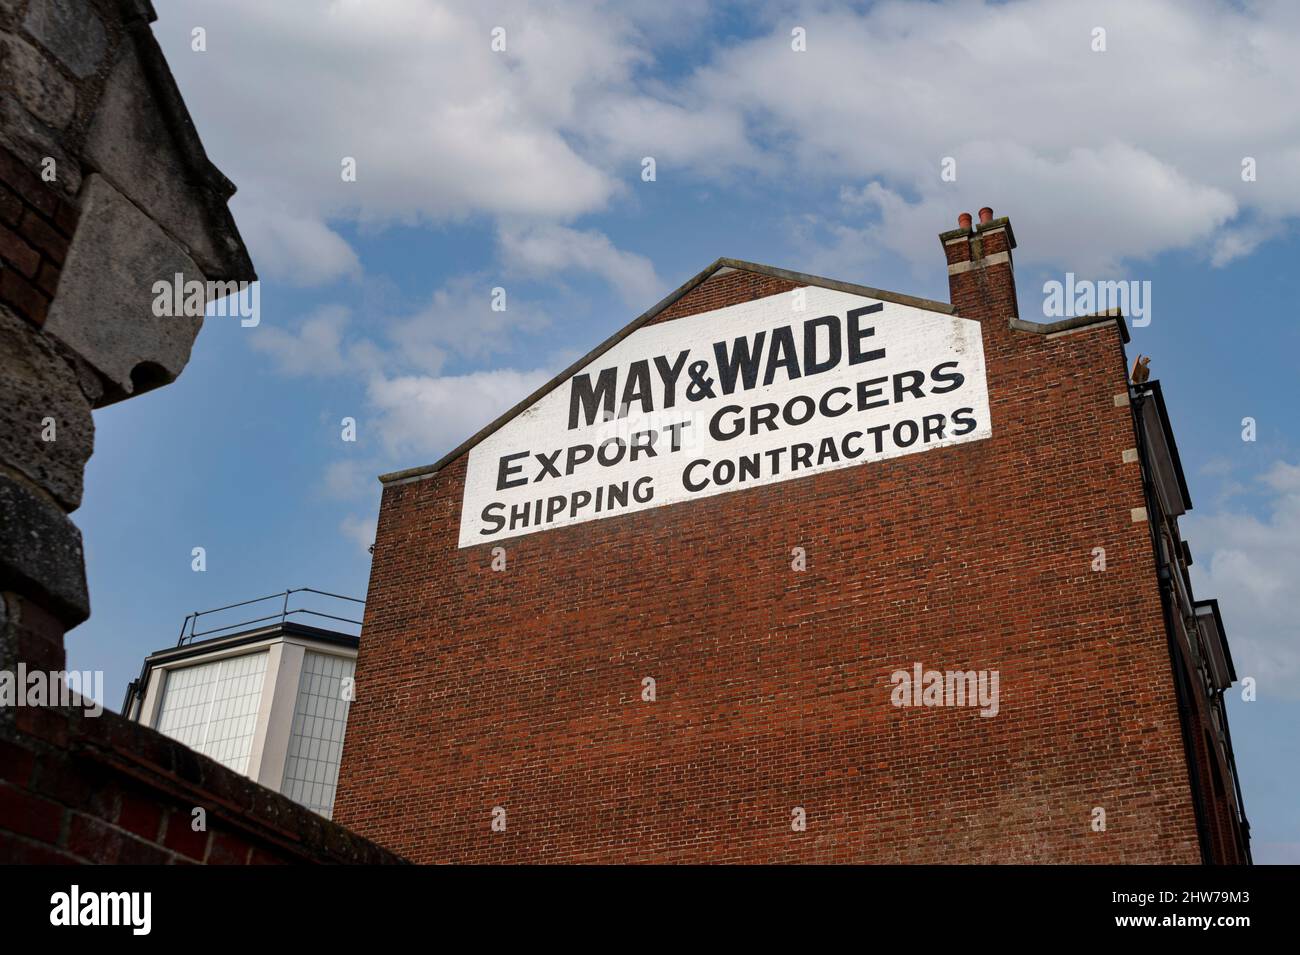 May & Wade Export Grocers Shipping Contractors building in the Old Town part of Southampton Stock Photo